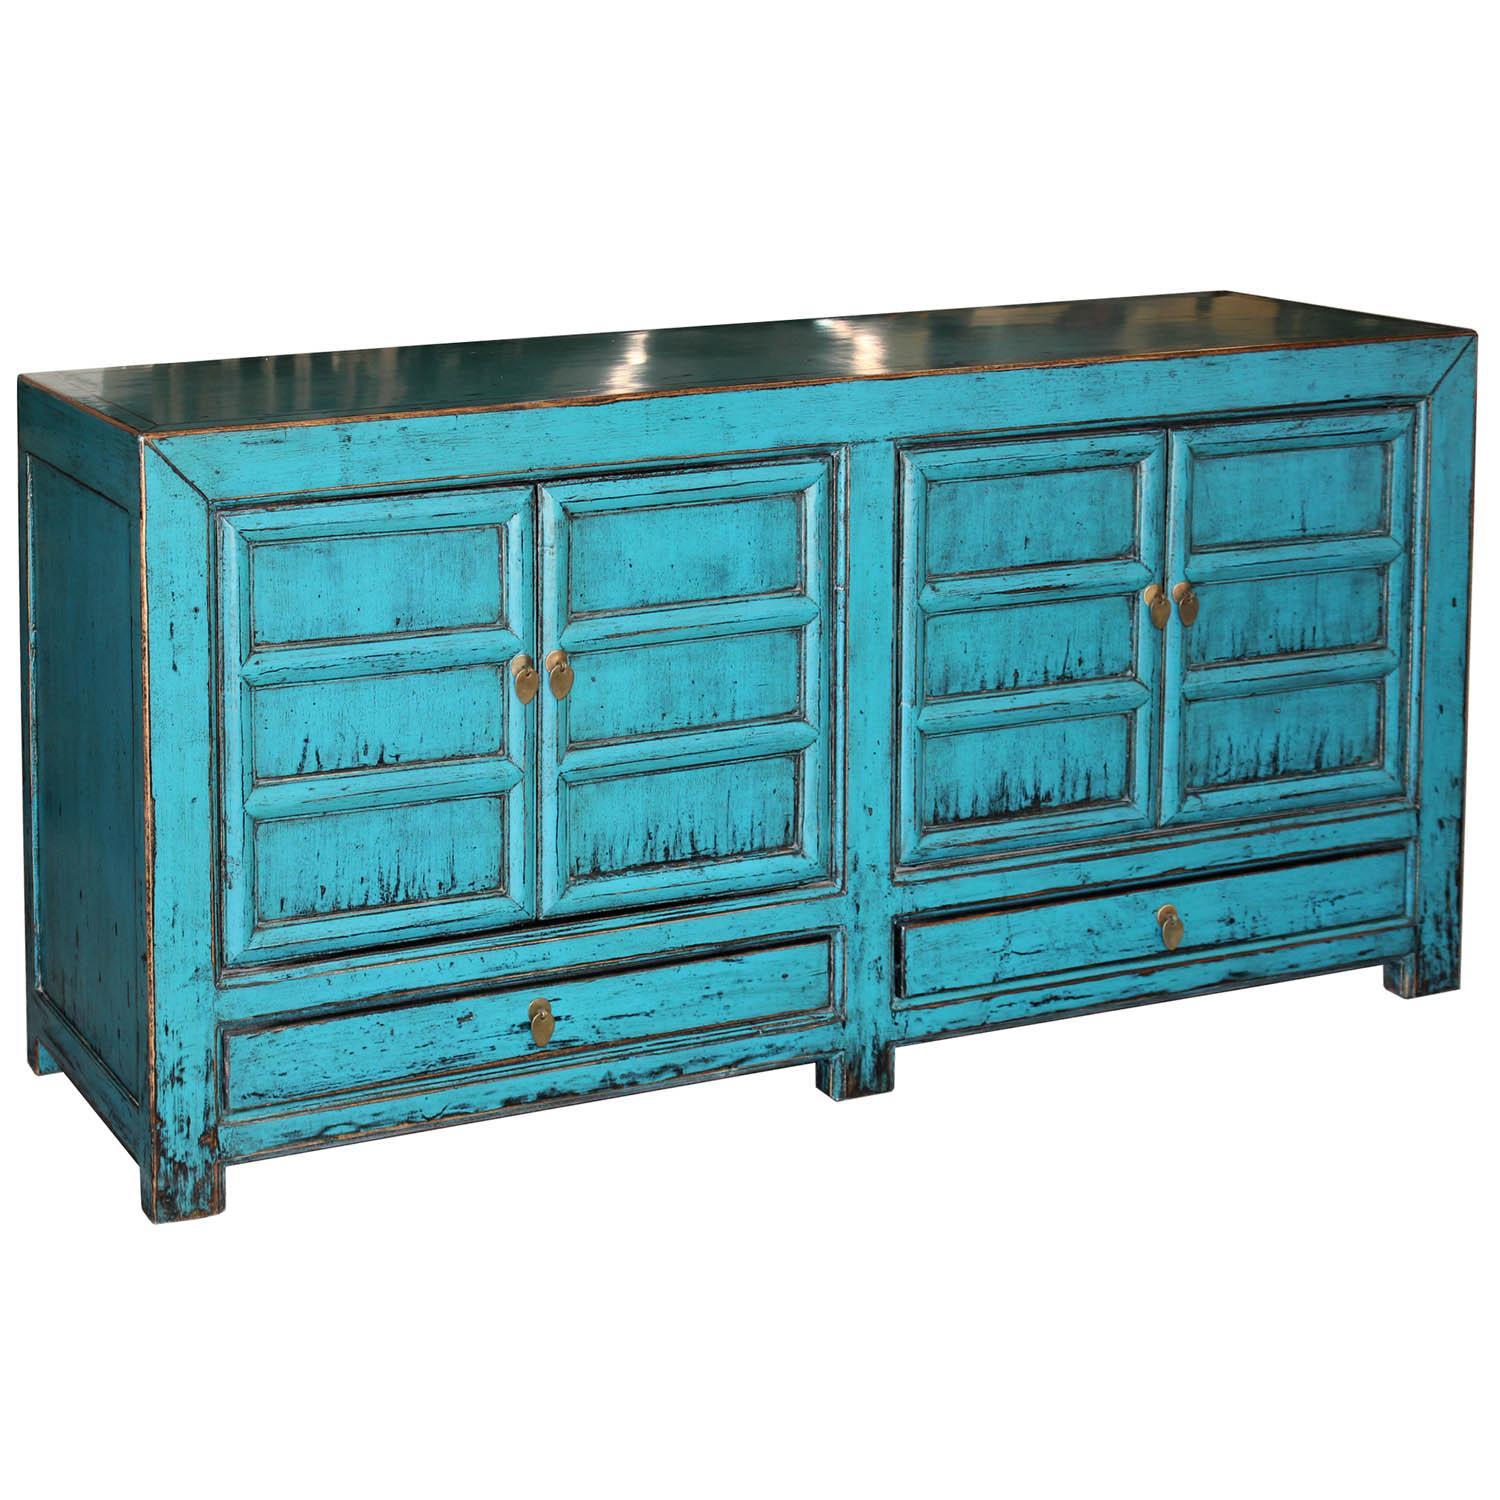 Contemporary blue lacquer buffet with two bottom doors, exposed wood edges and will brighten up any room in the house. Use in the entry, living or dining room for a pop of color.